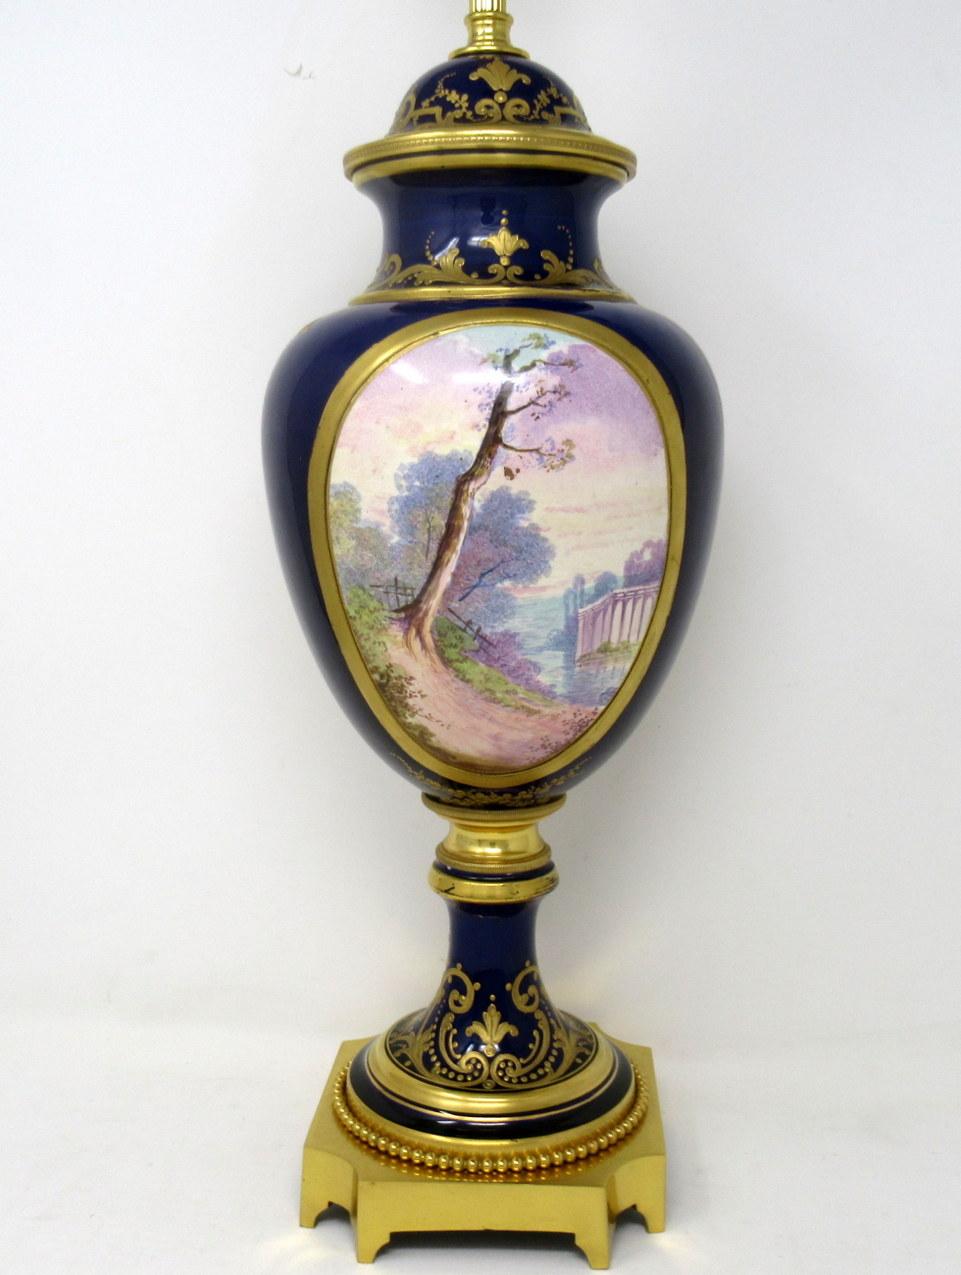 French Sèvres Porcelain Watteau Scene Ormolu Cobalt Blue Table Lamp 19th Century In Good Condition For Sale In Dublin, Ireland